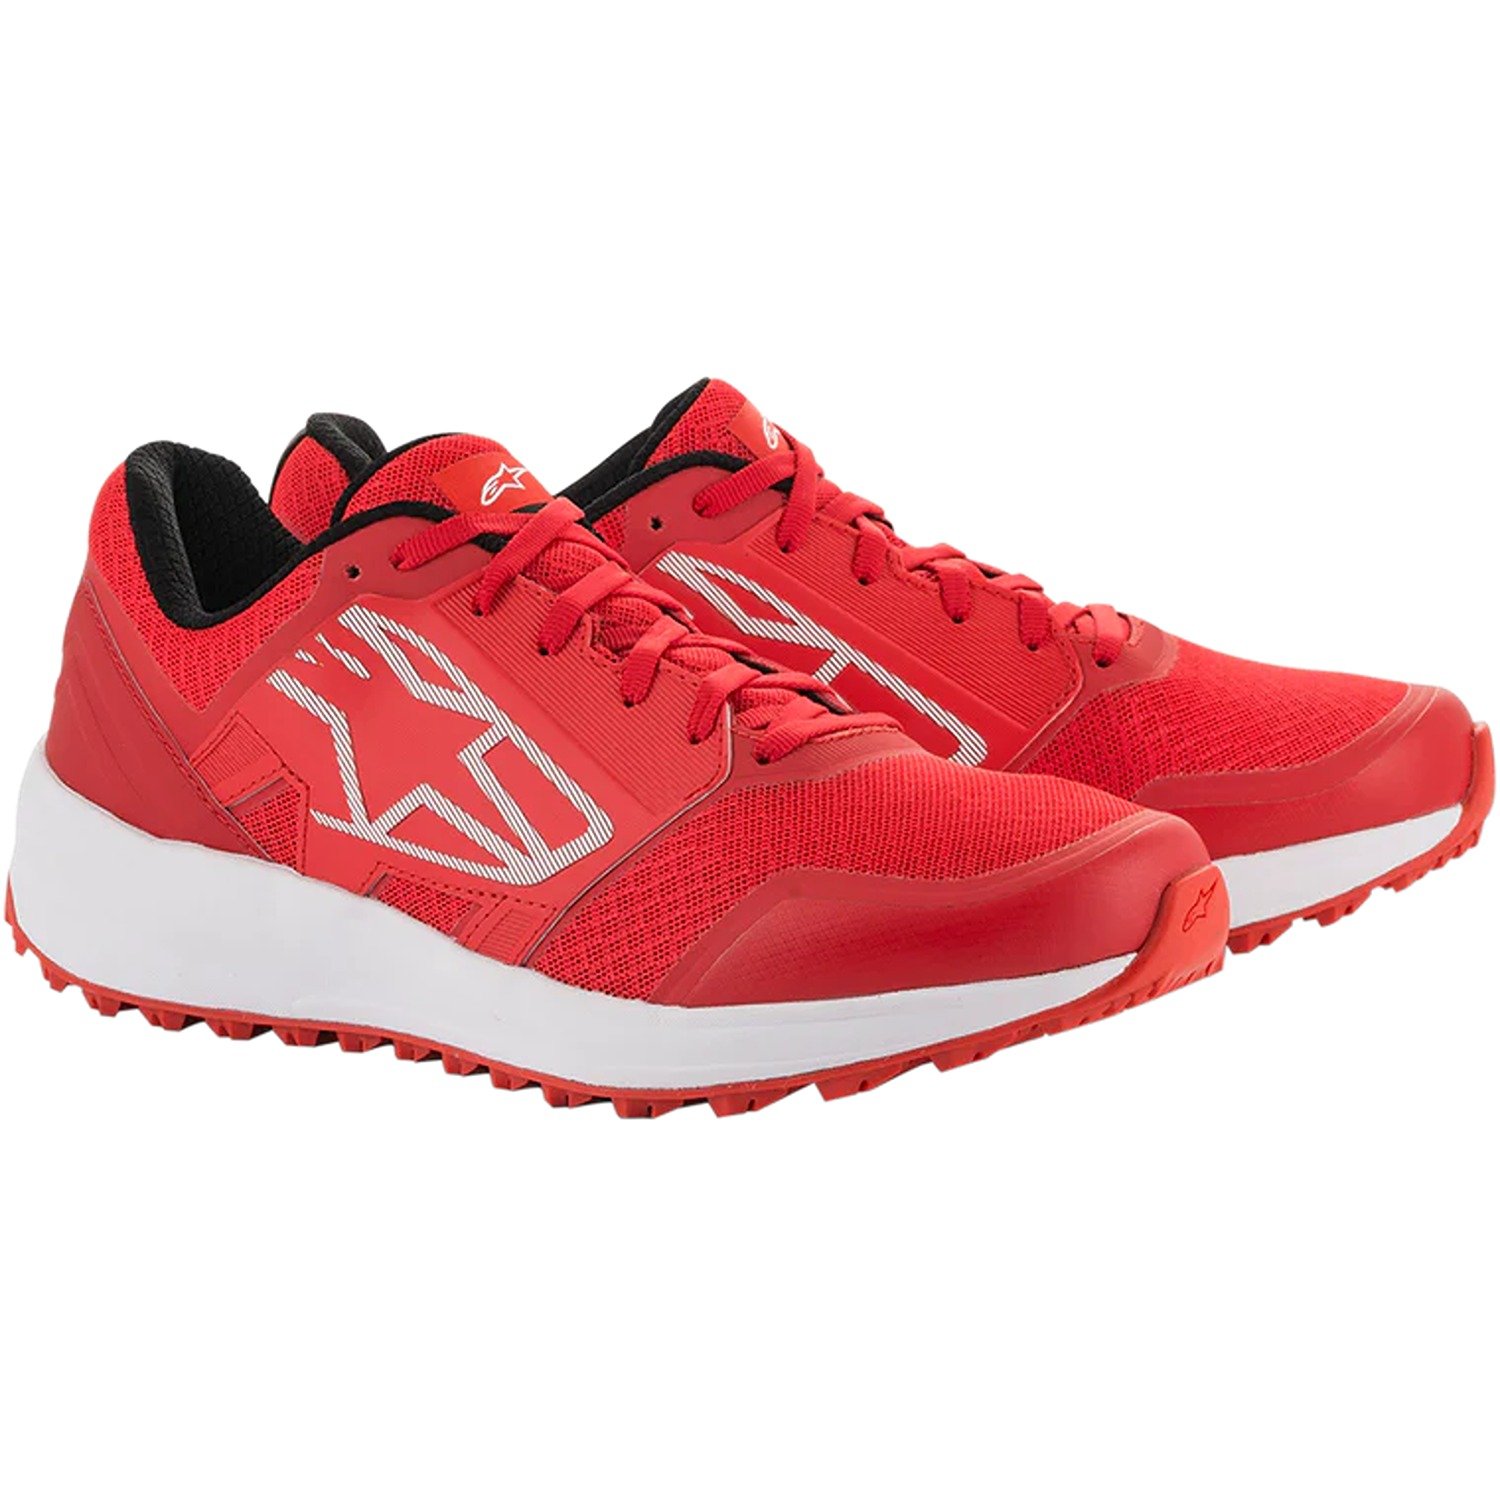 Image of EU Alpinestars Meta Trail Shoes Red White Taille US 10